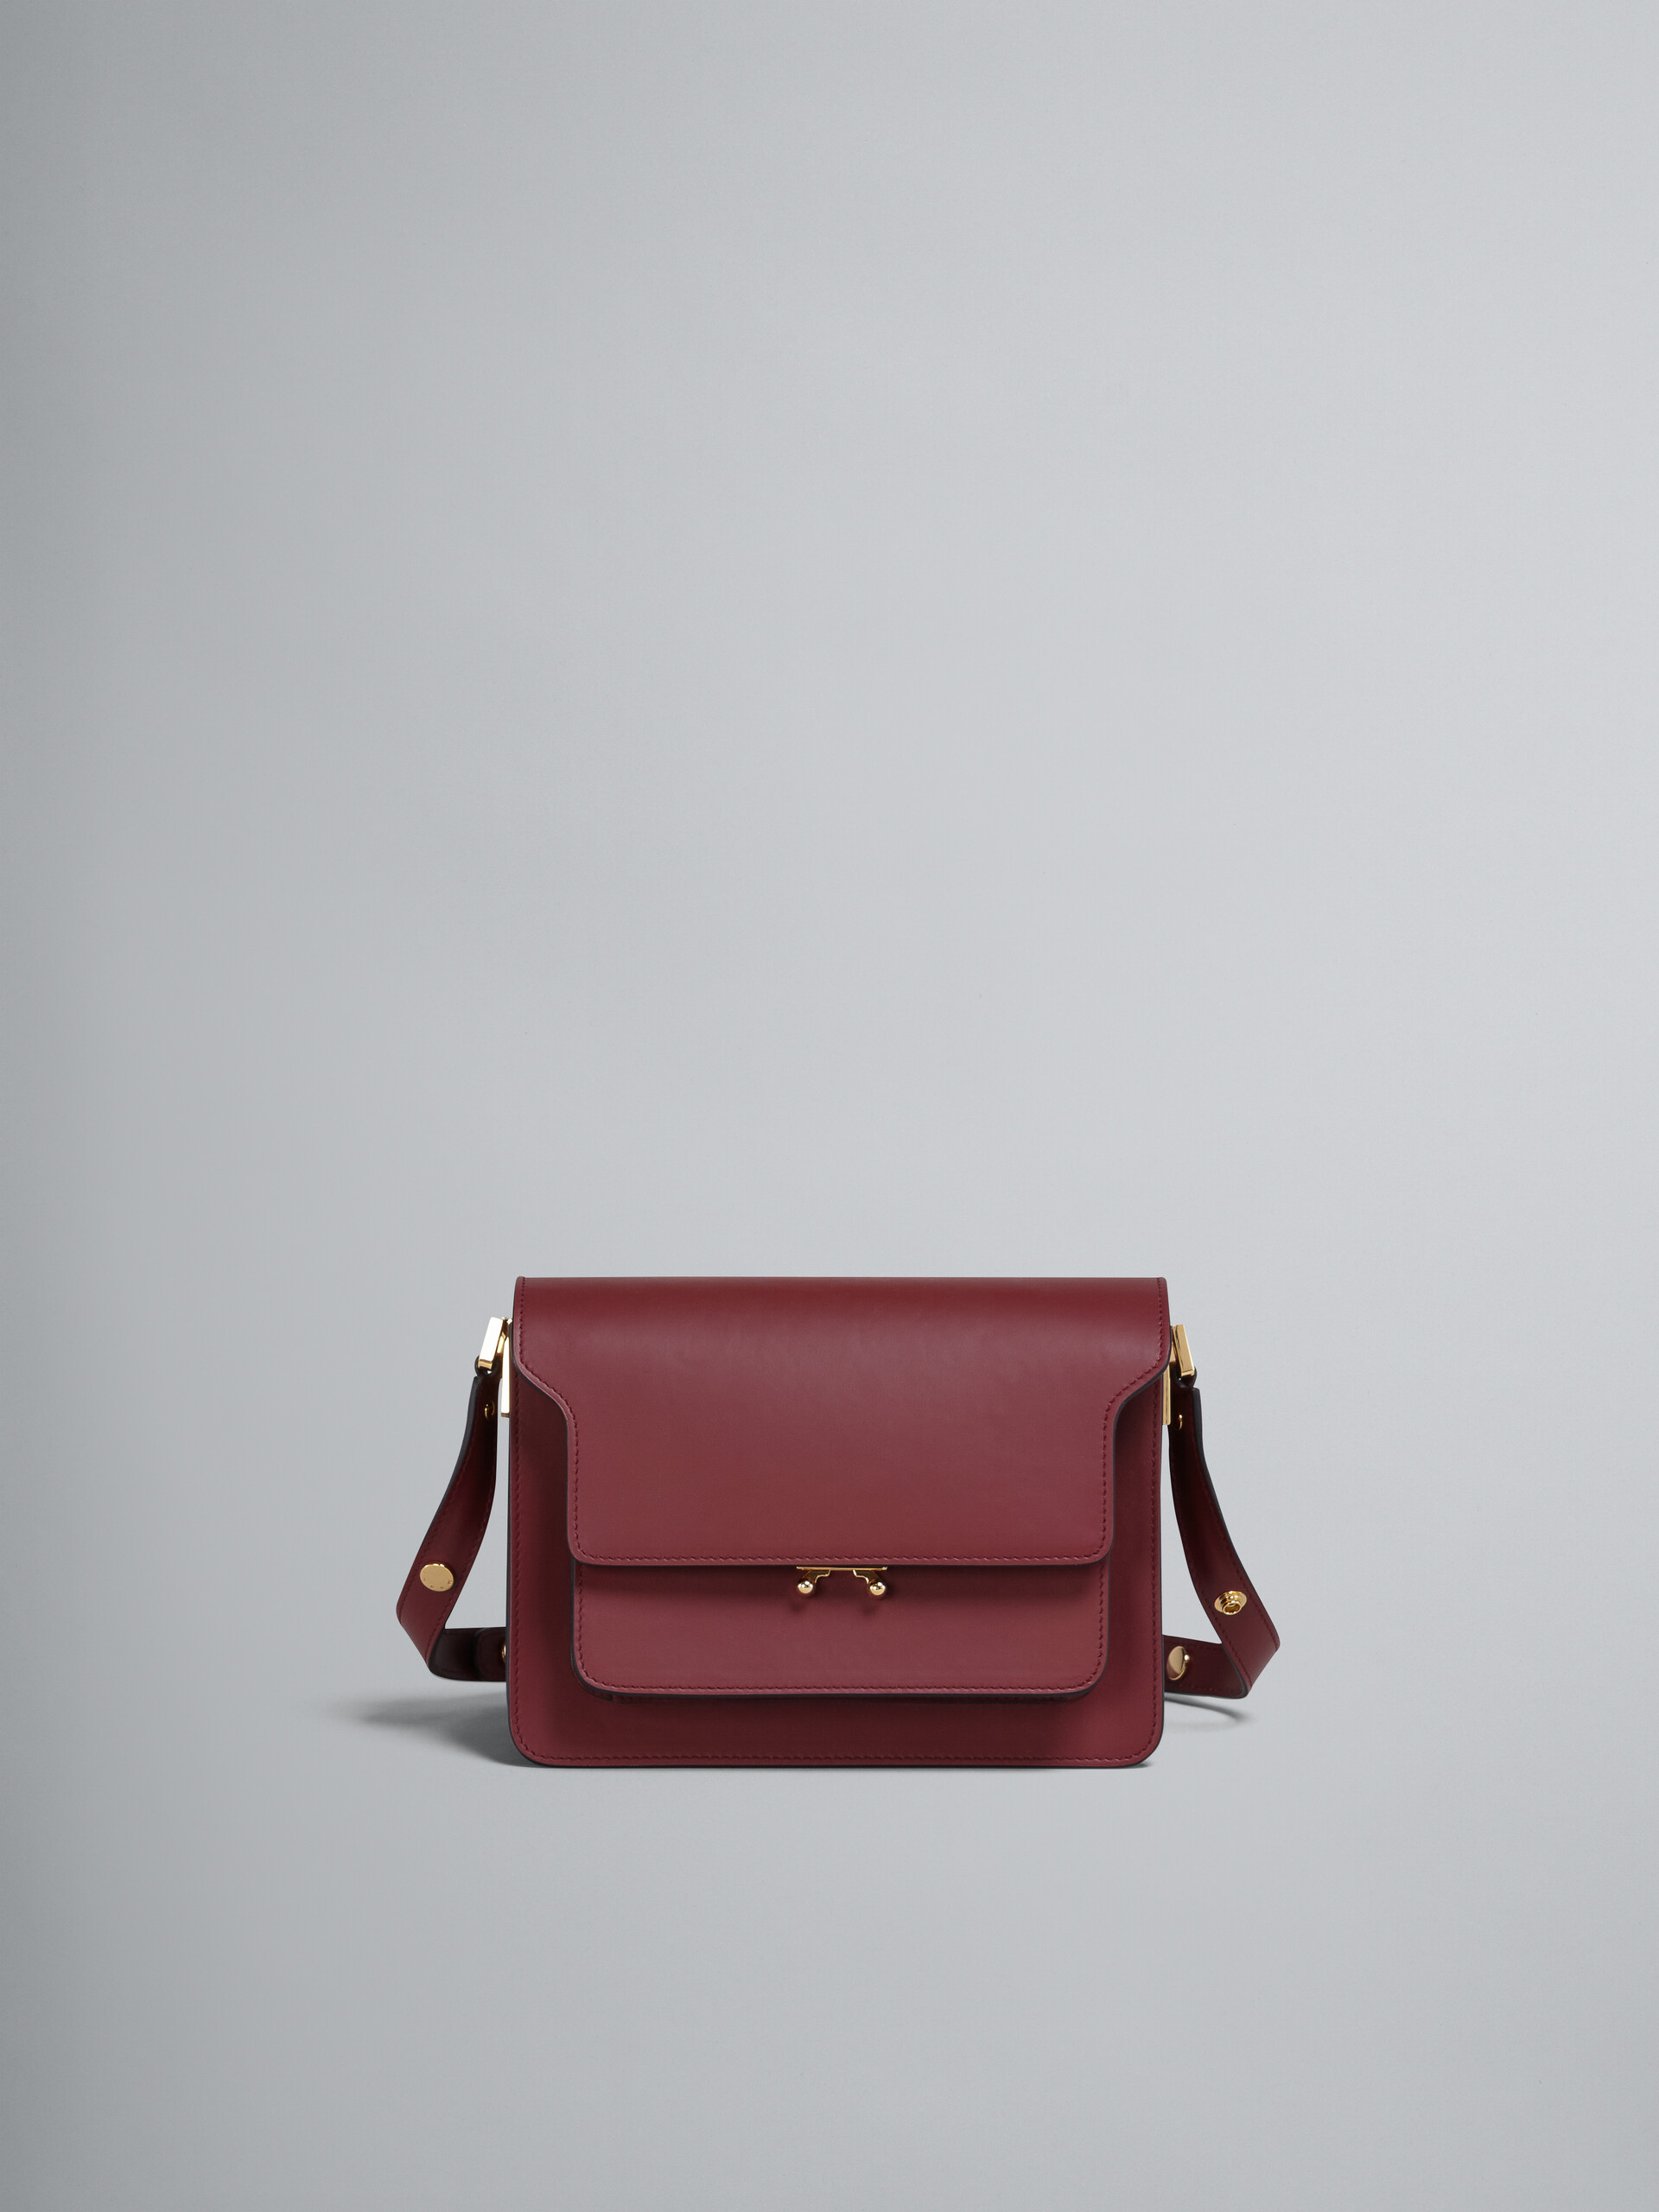 TRUNK medium bag in red leather | Marni